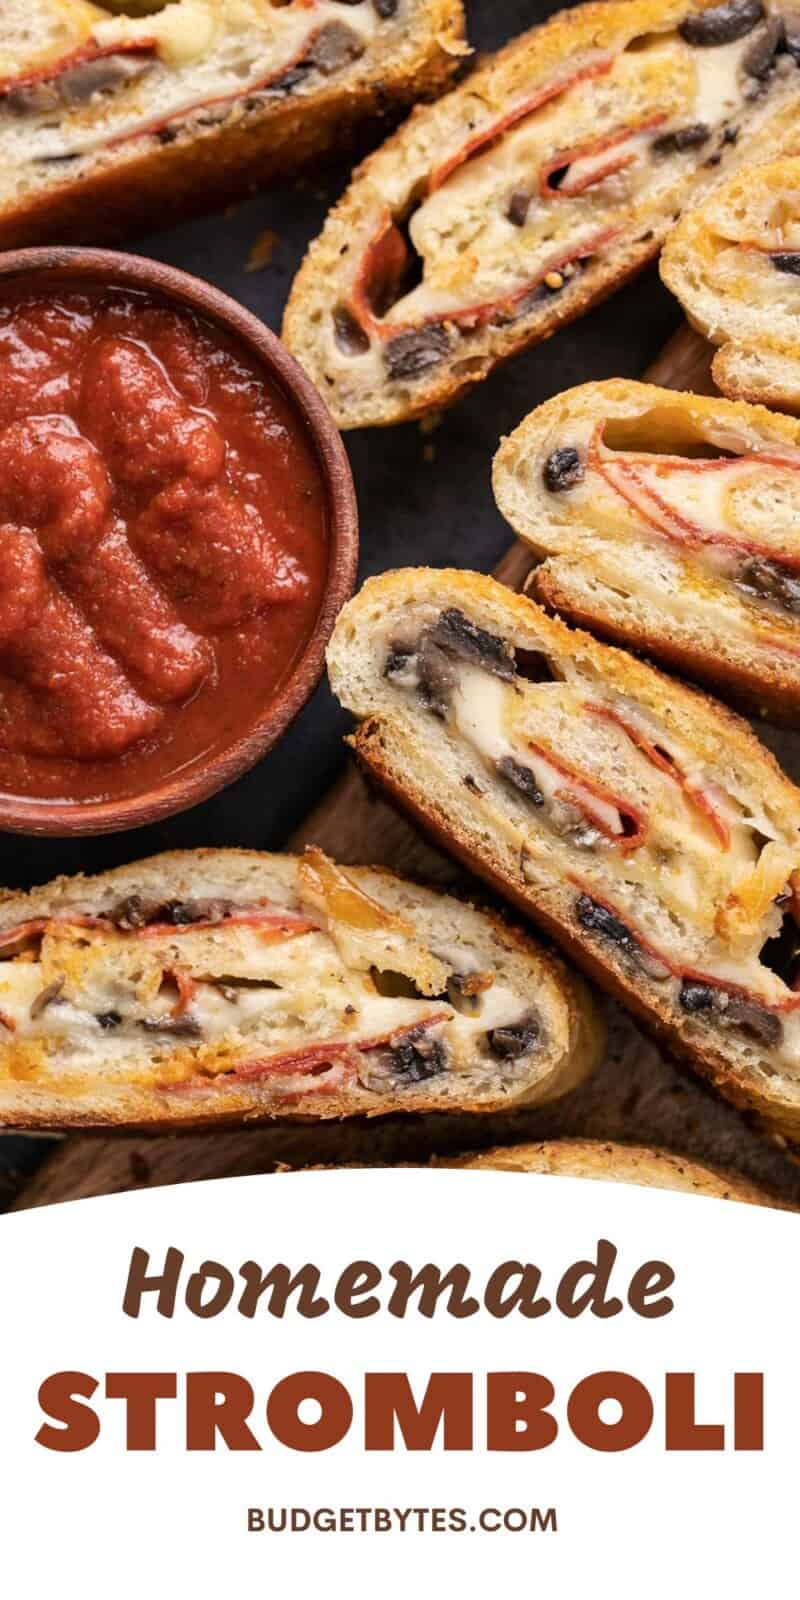 Overhead view of stromboli slices near a bowl of sauce.